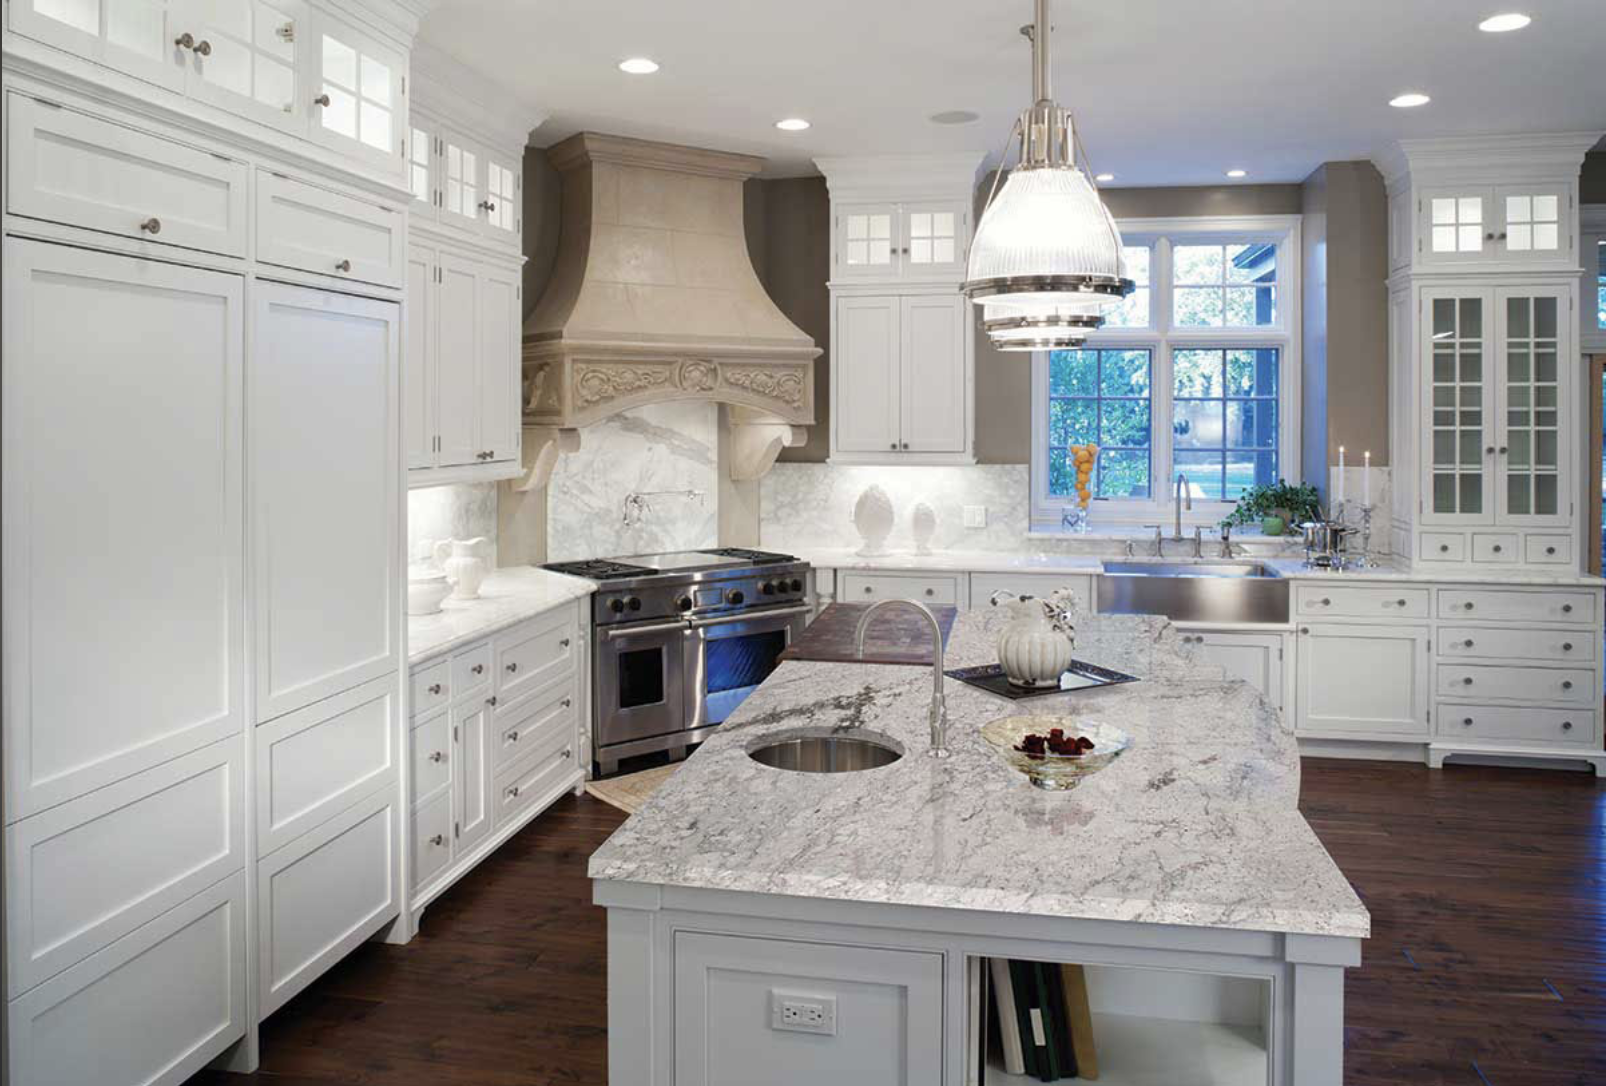 Pros And Cons Of Granite Countertops, What Is The Best Color For Granite Countertops